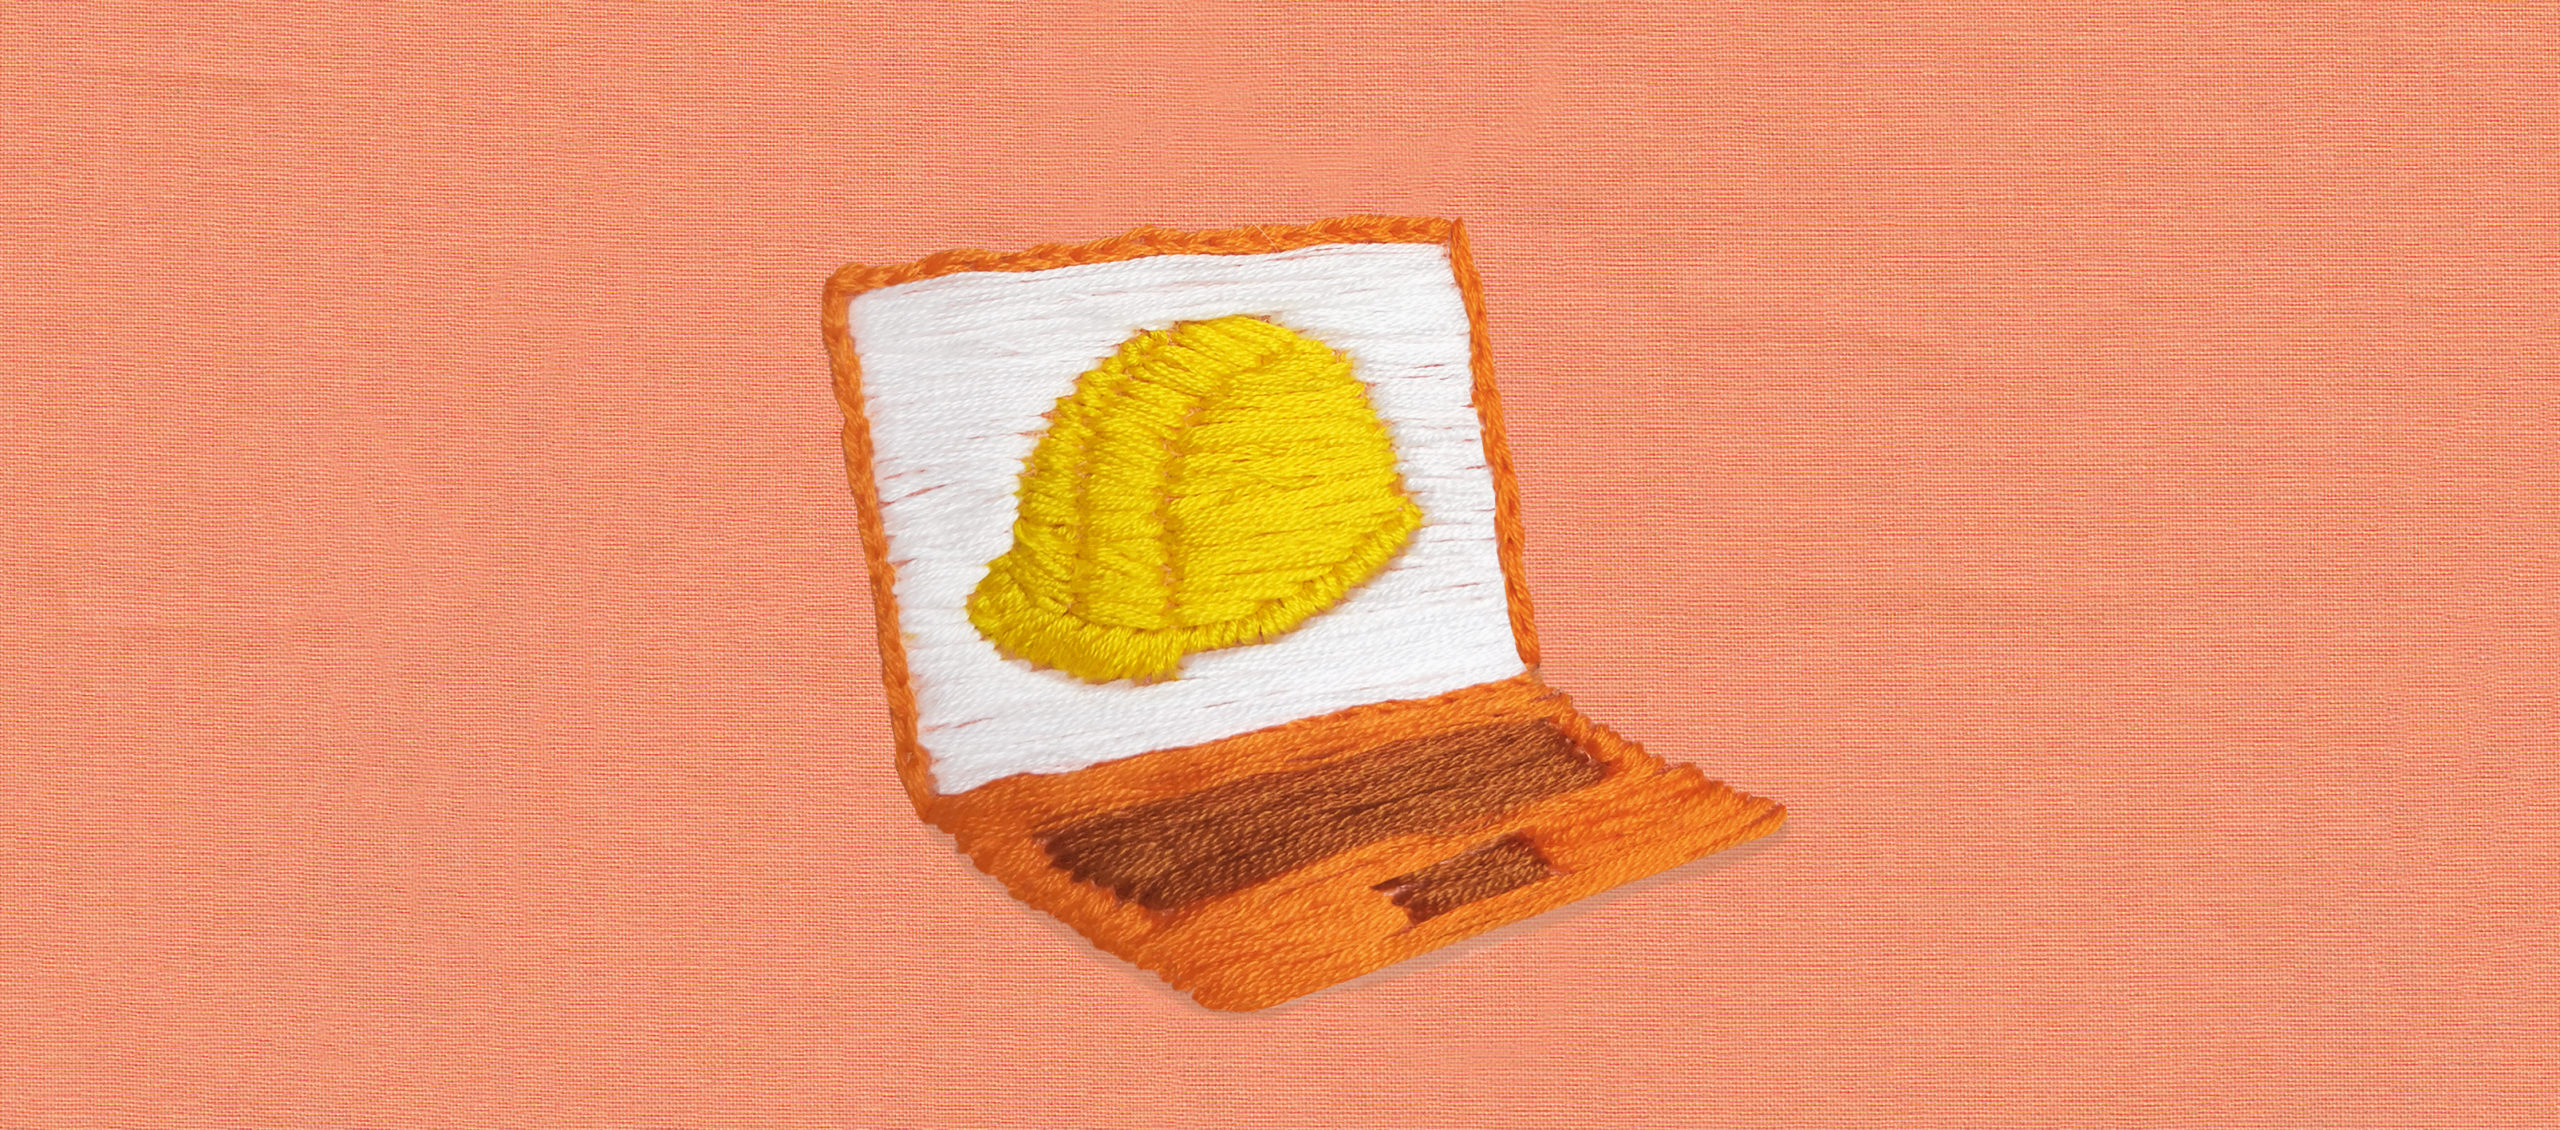 Illustration of laptop with a hardhat on the screen